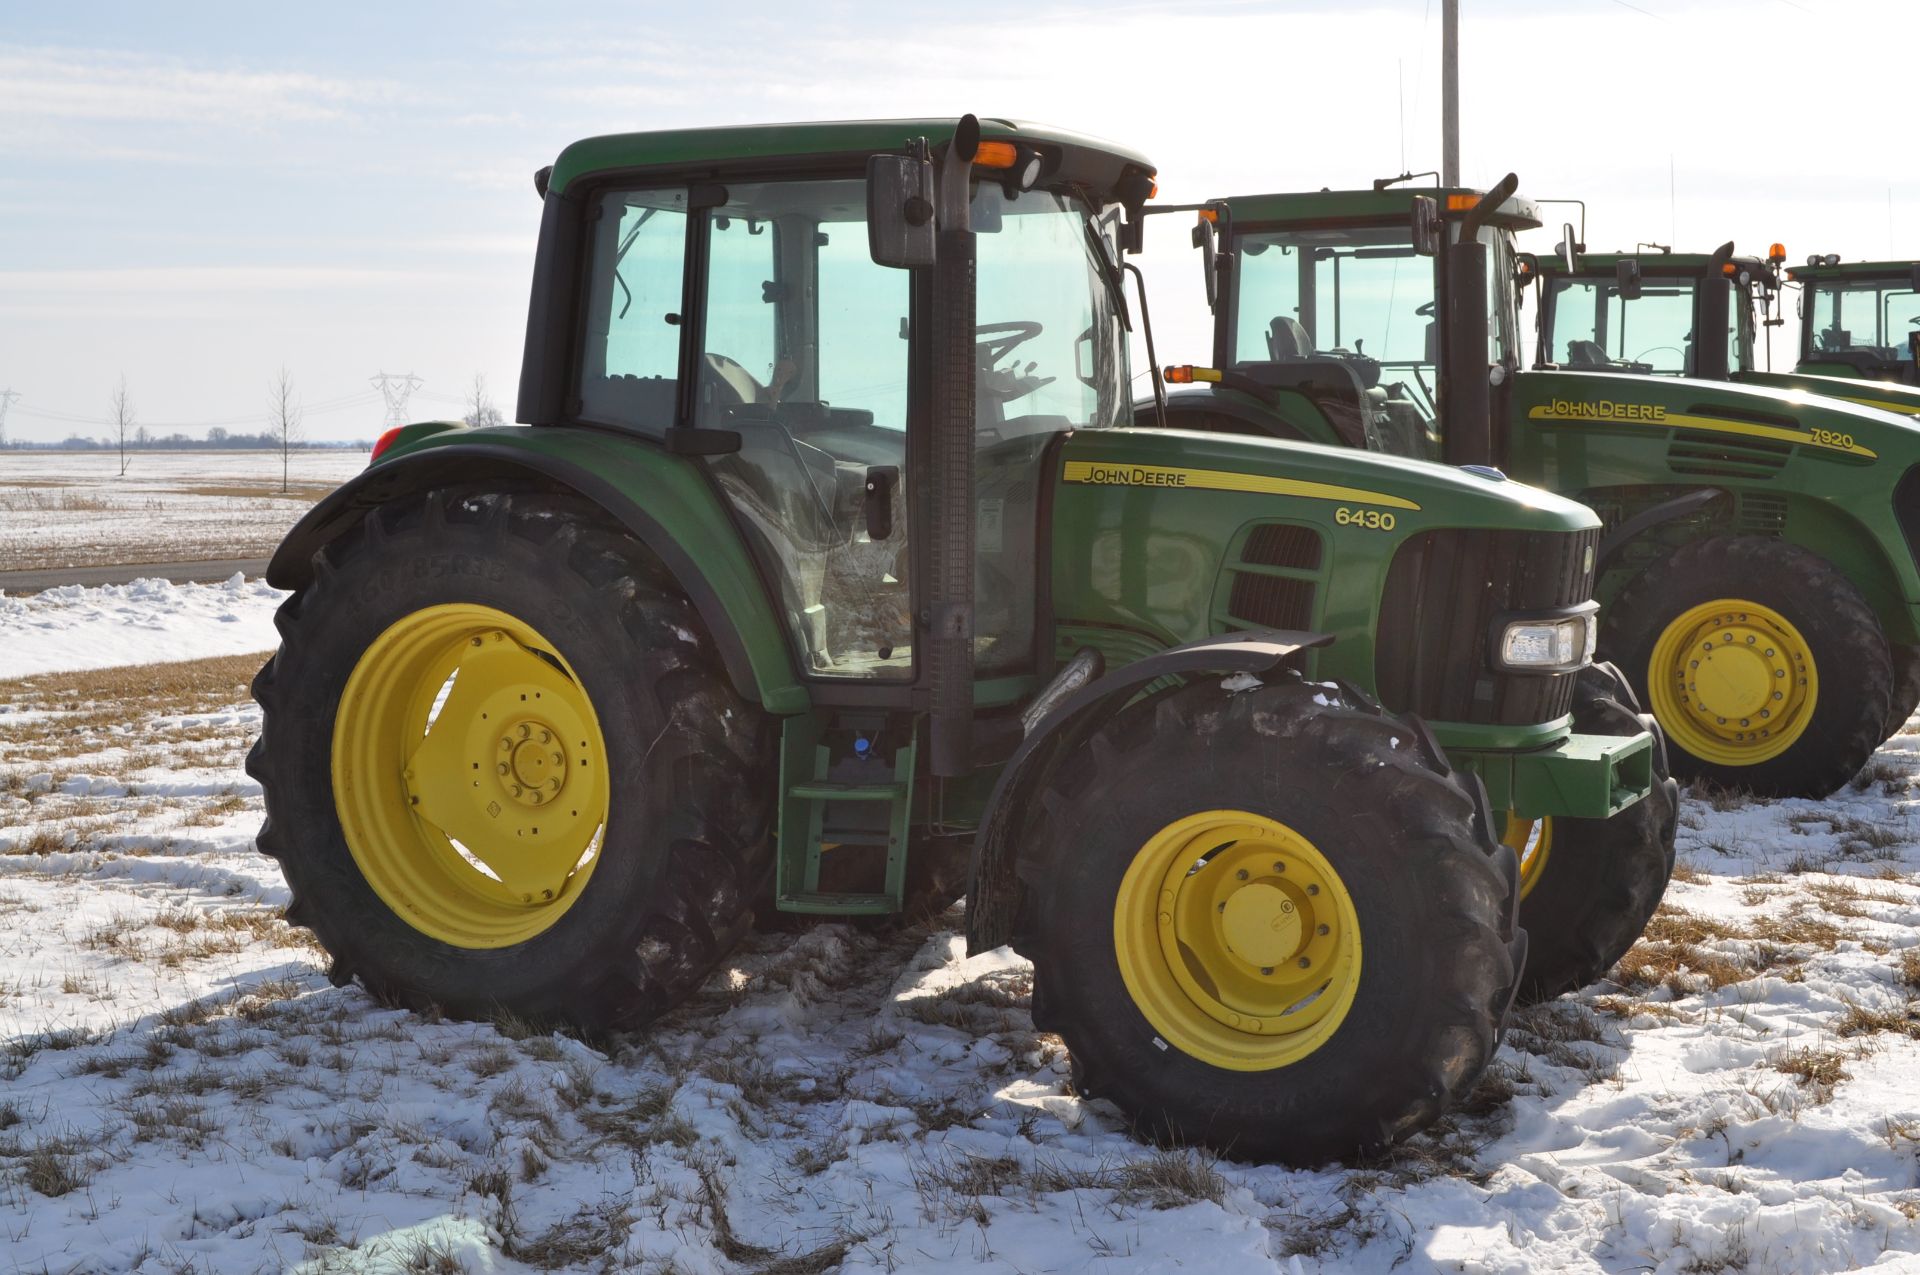 John Deere 6430 tractor, MFWD, C/H/A, 6x4 trans, 460/85R38 rear, 420/85R24 front, front fenders, - Image 5 of 36